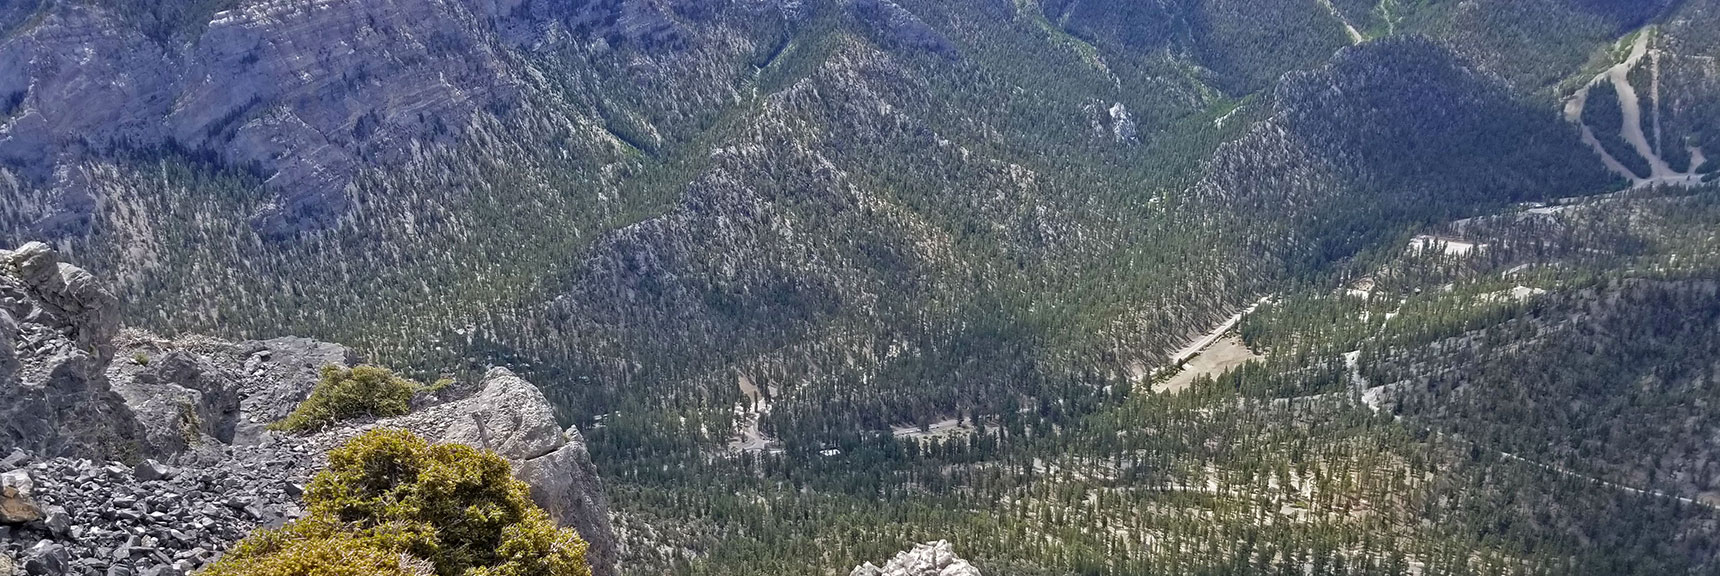 View Straight Down Into Upper Lee Canyon and Ski Runs | The Sisters South | Lee Canyon | Mt Charleston Wilderness | Spring Mountains, Nevada